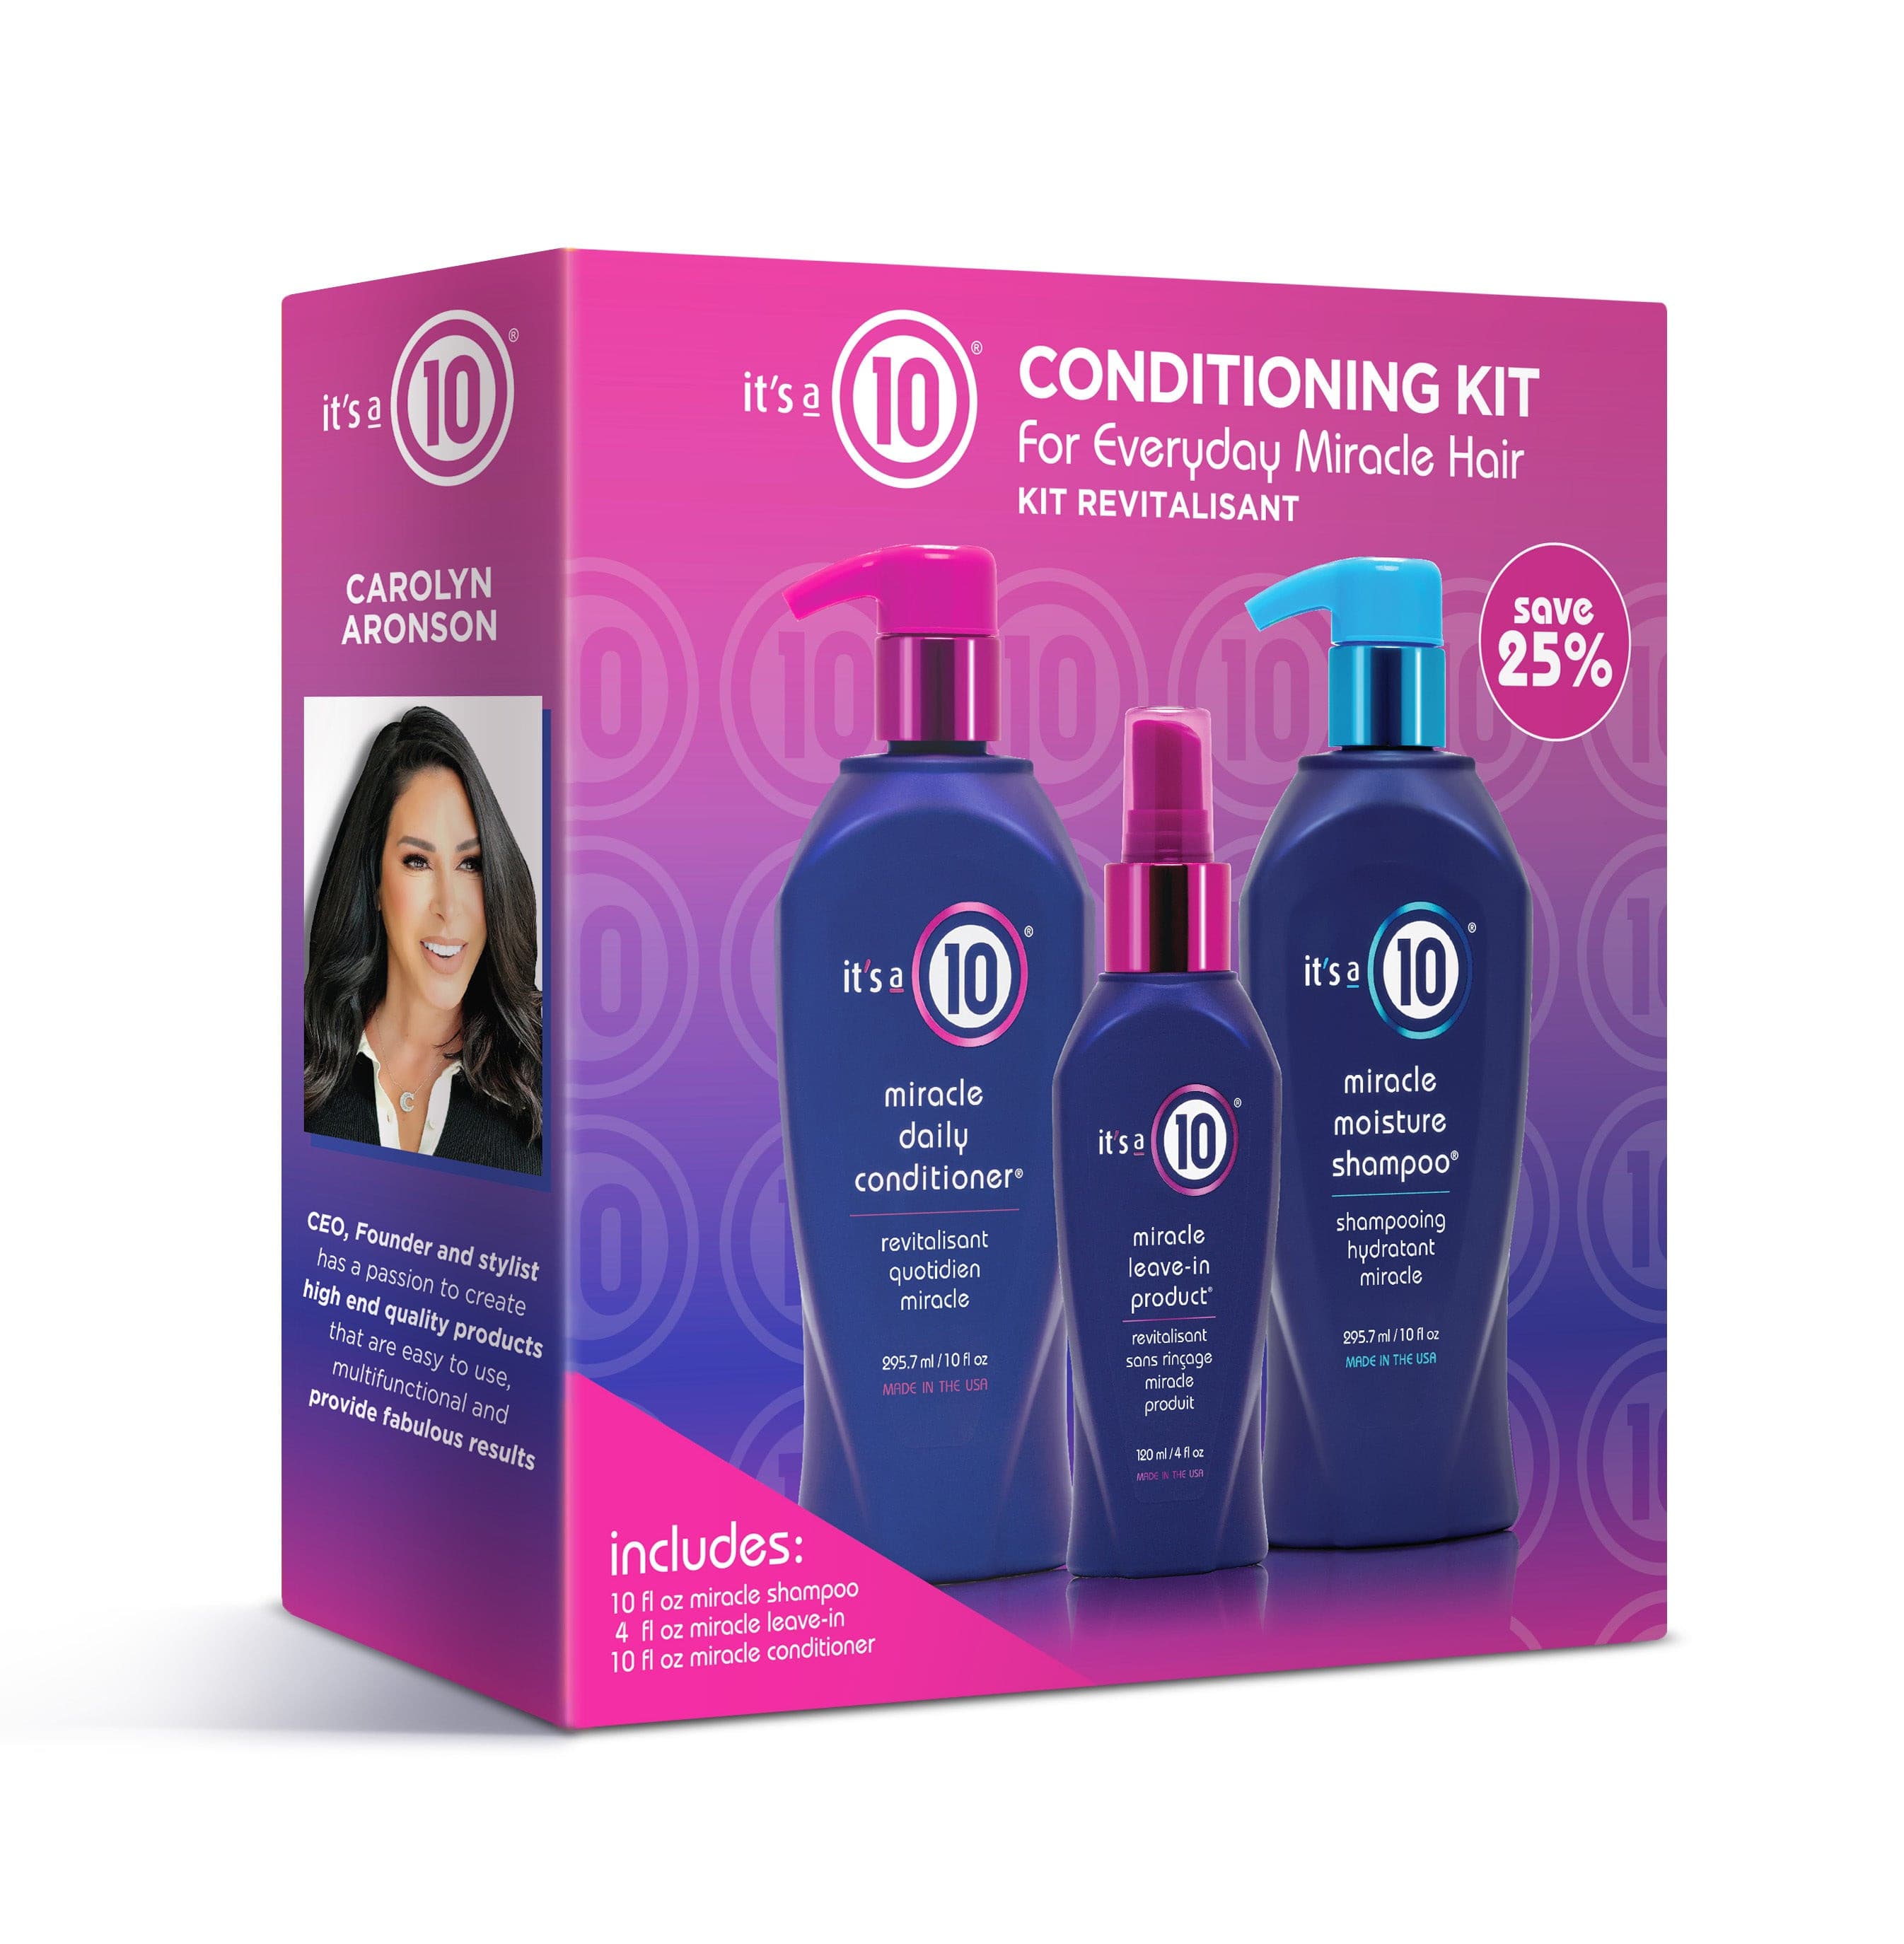 It’s a 10 Miracle Conditioning Trio Kit